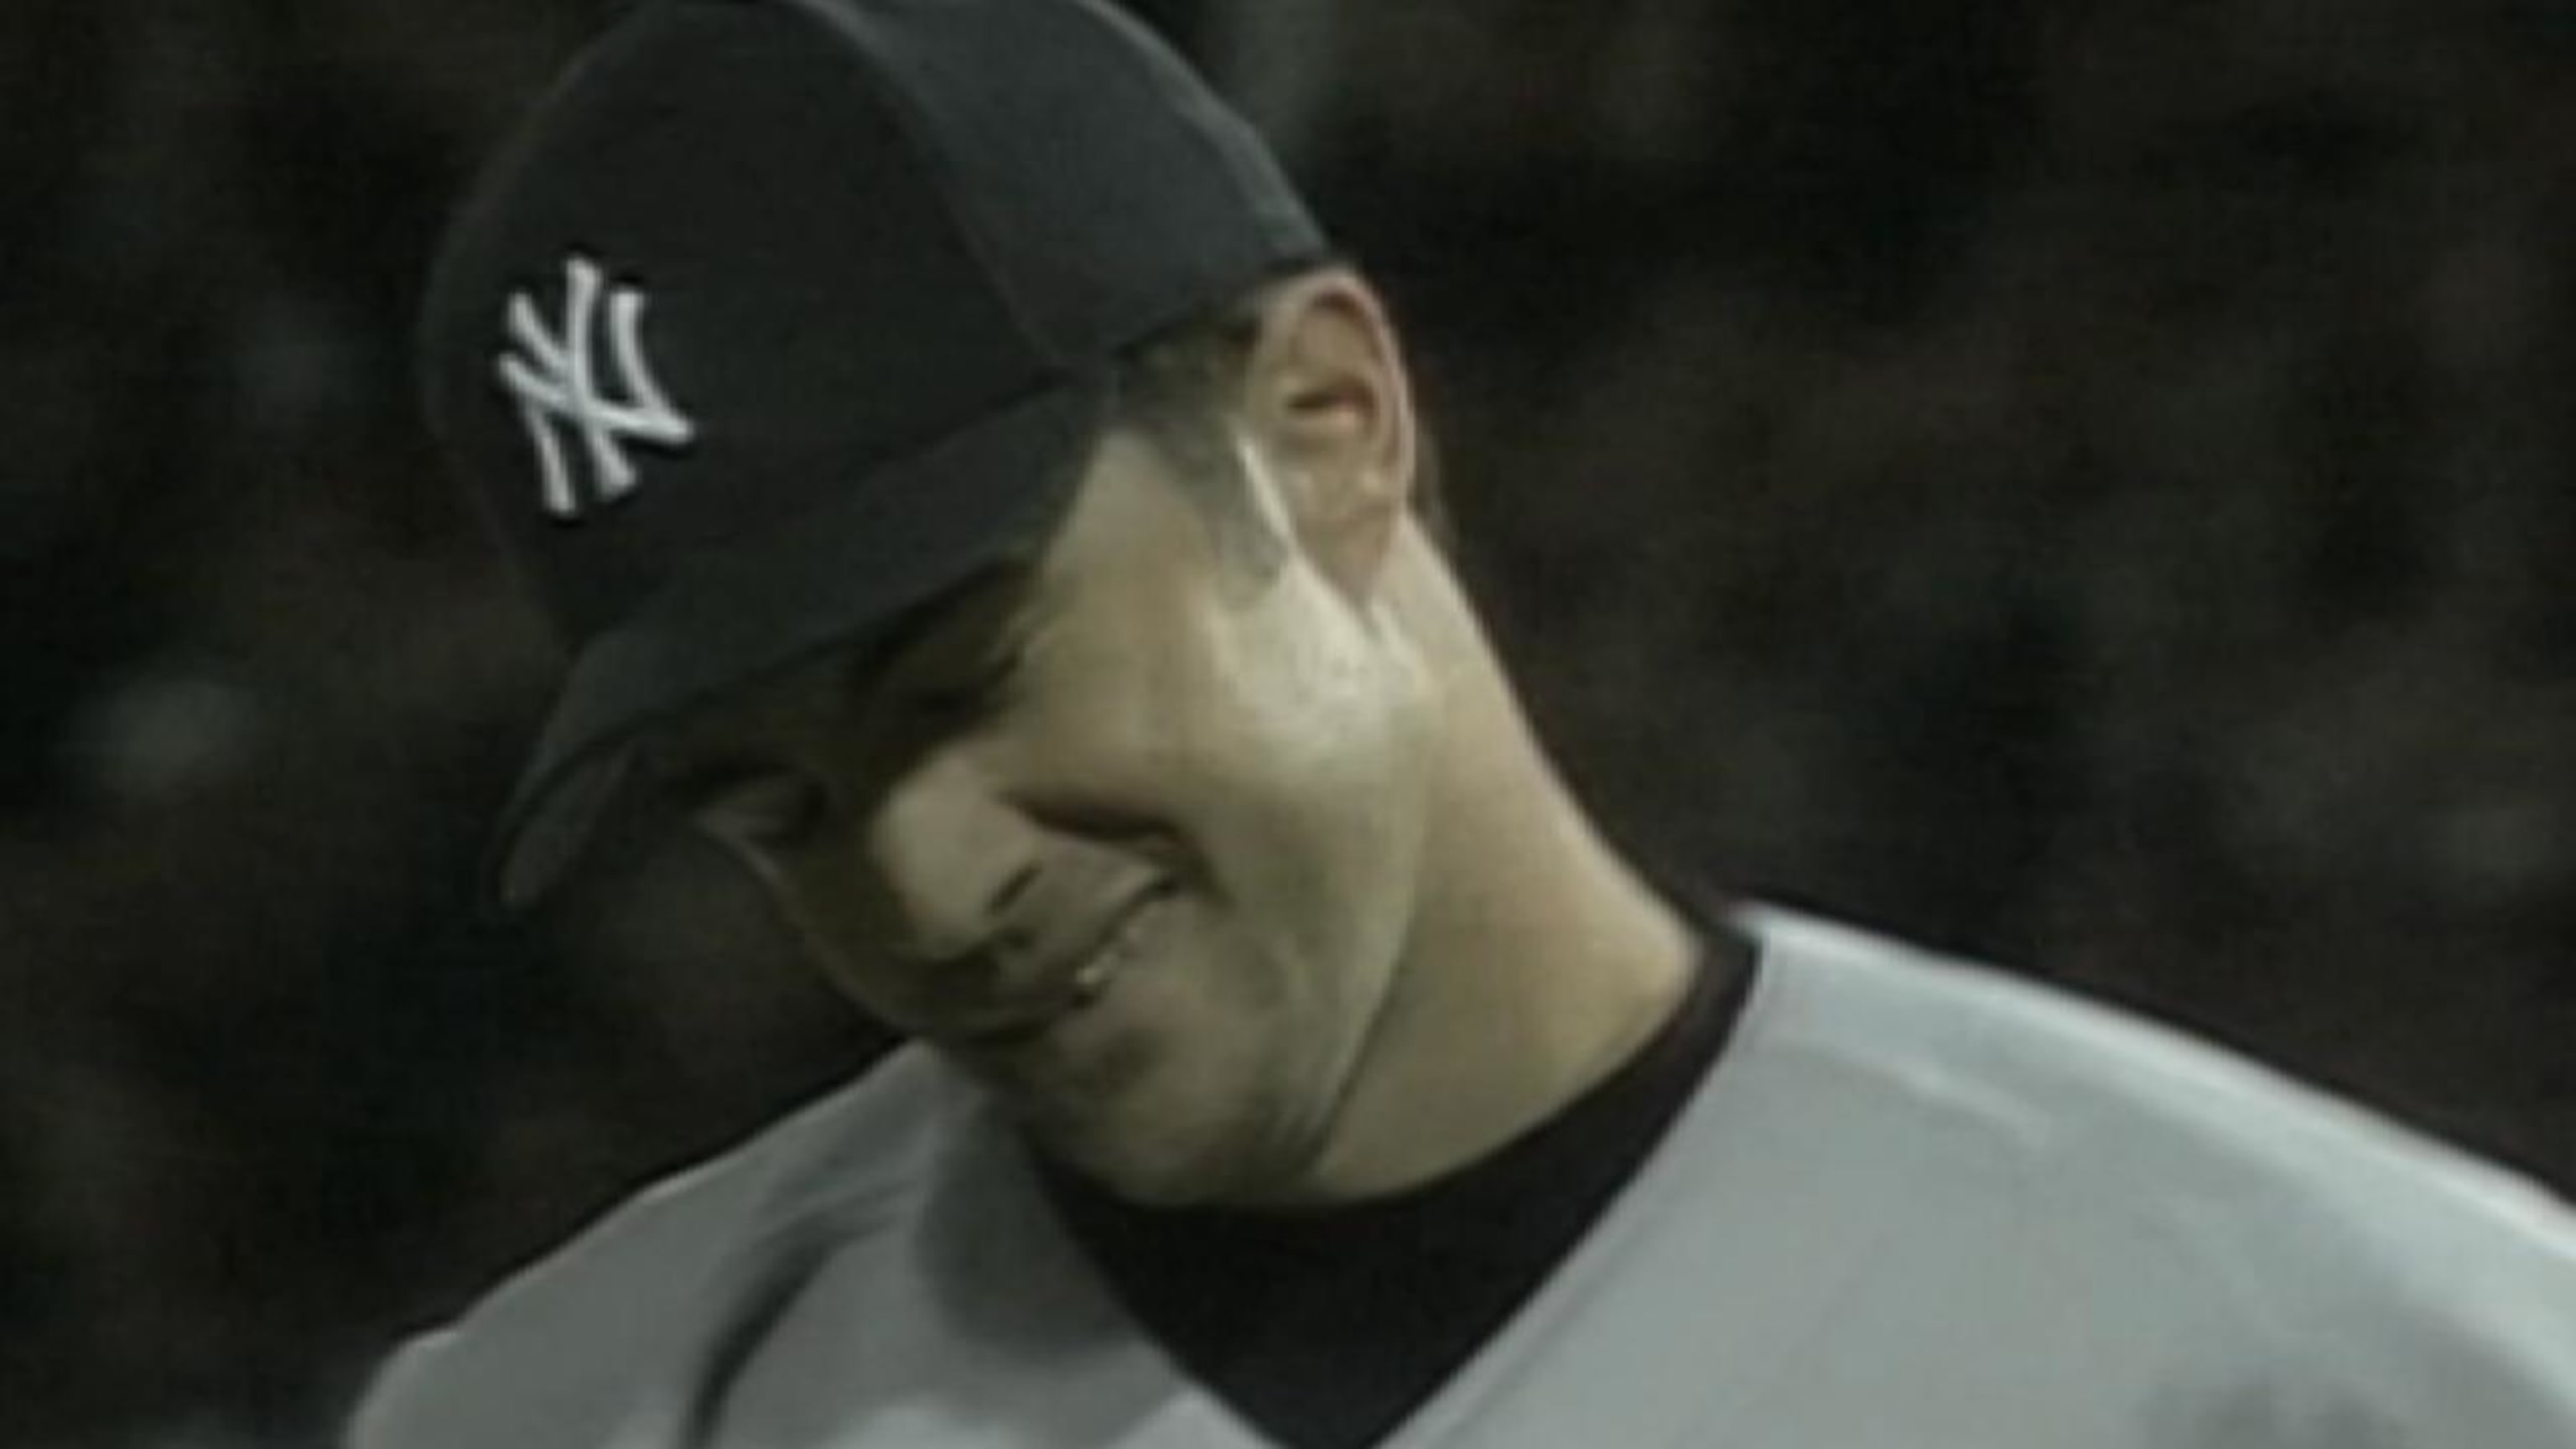 Mike Mussina's top moments